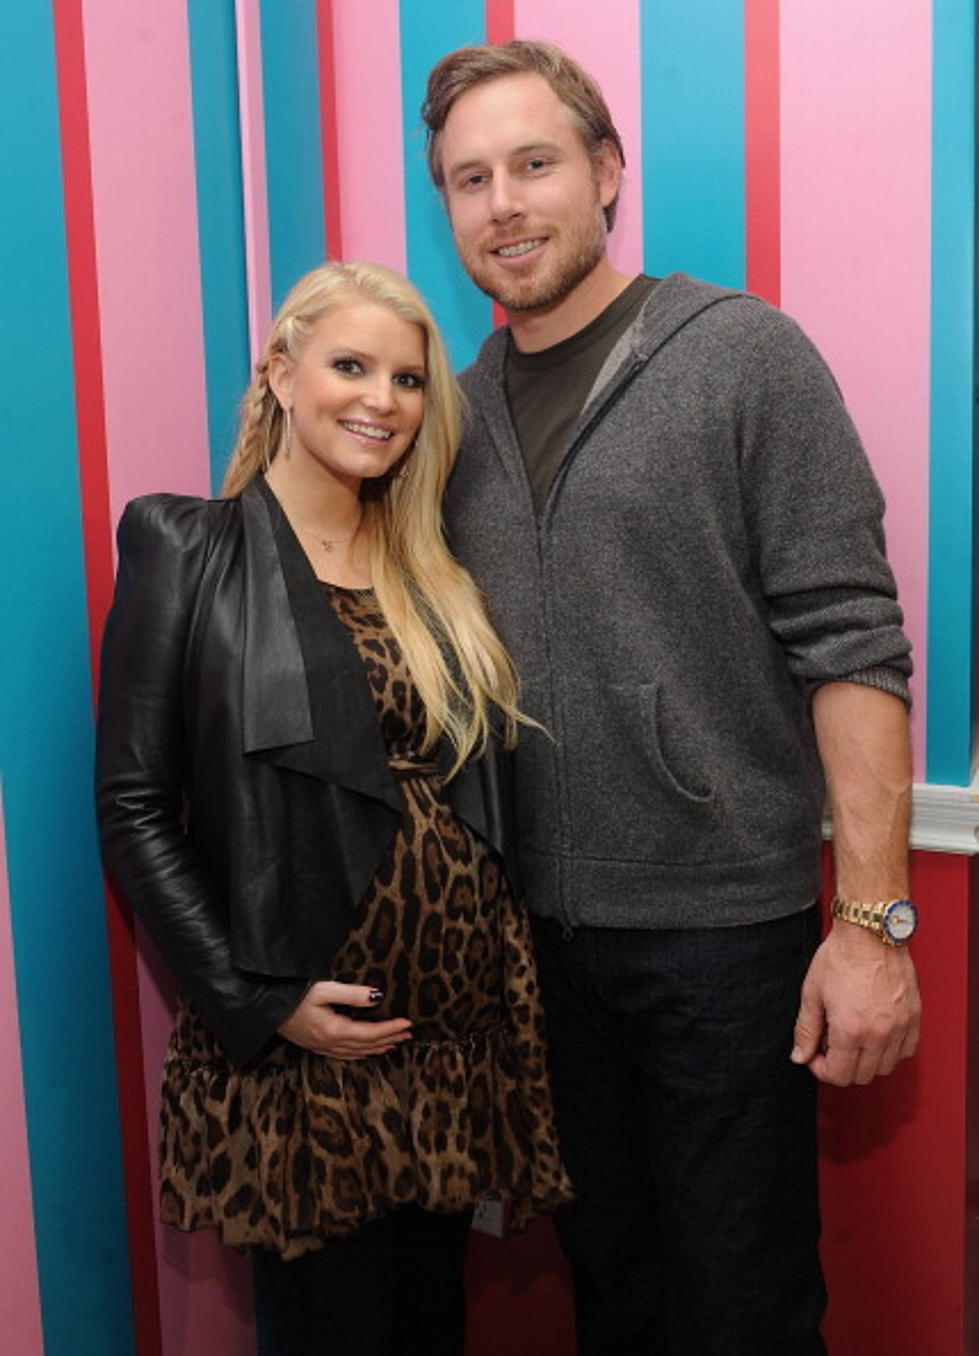 What Do You Think Of Jessica Simpson’s Baby Name? [POLL]